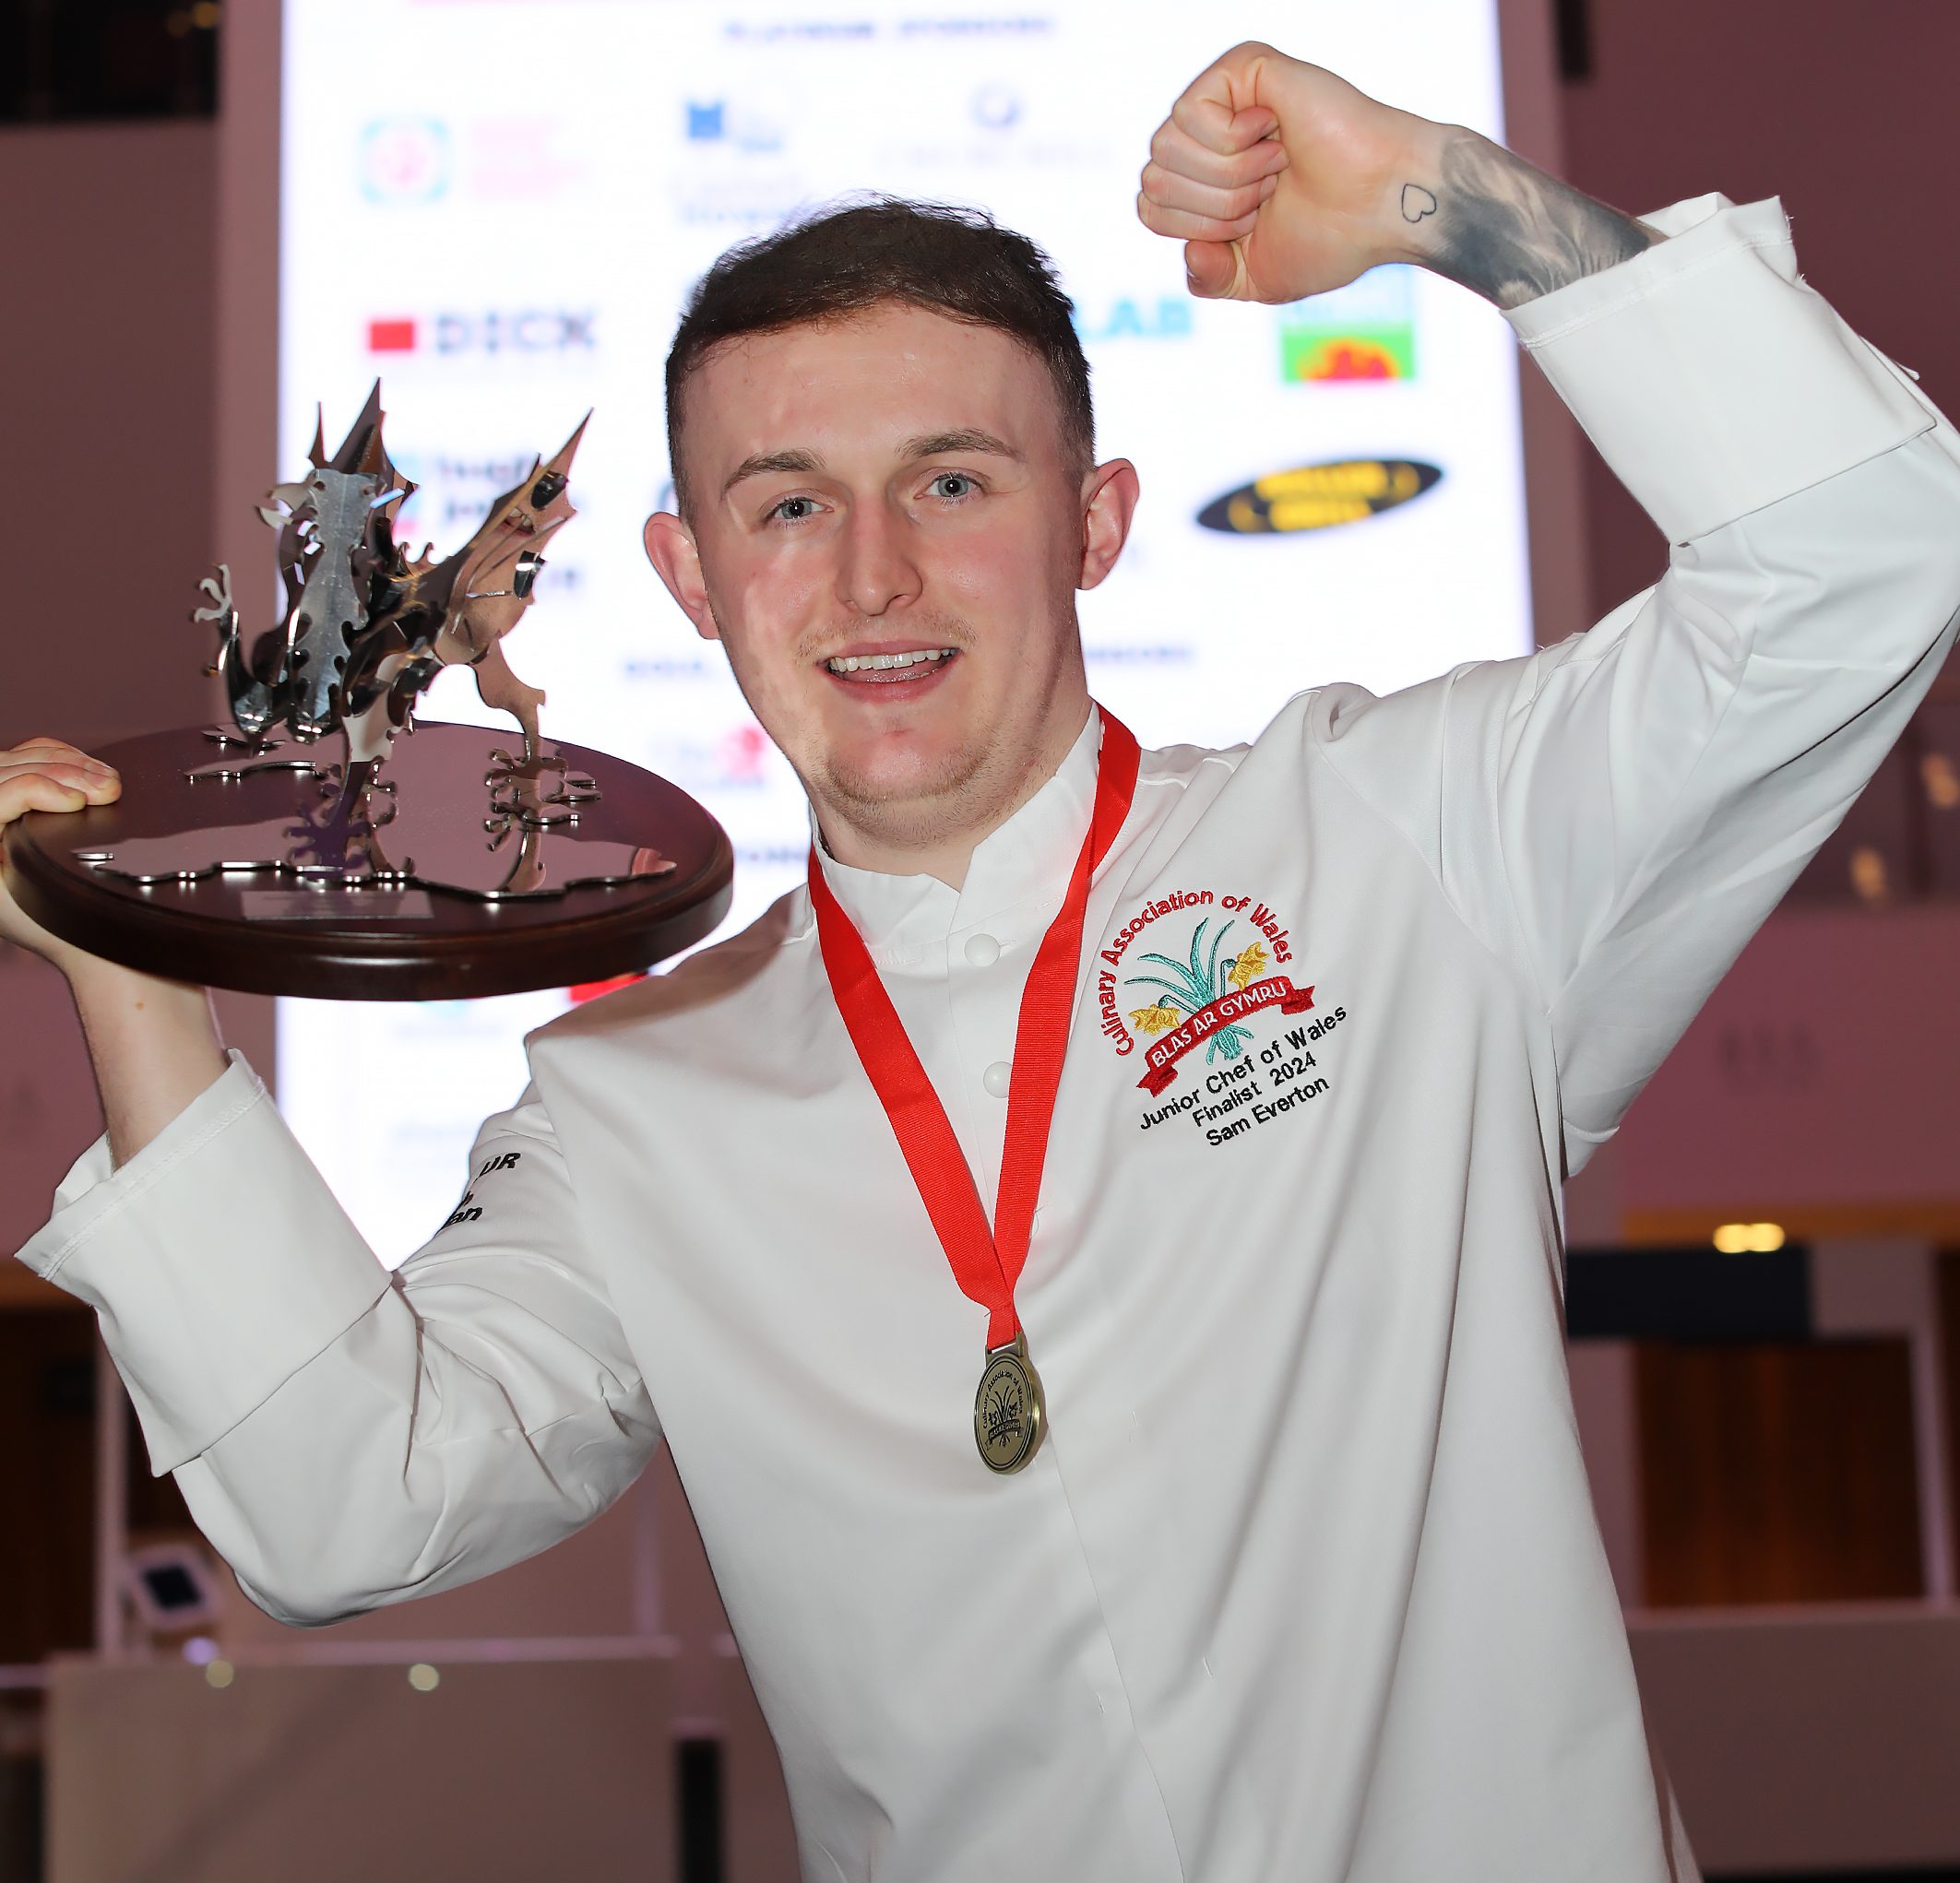 Sam Everton holds the dragon trophy aloft to celebrate winning the Junior Chef of Wales final.